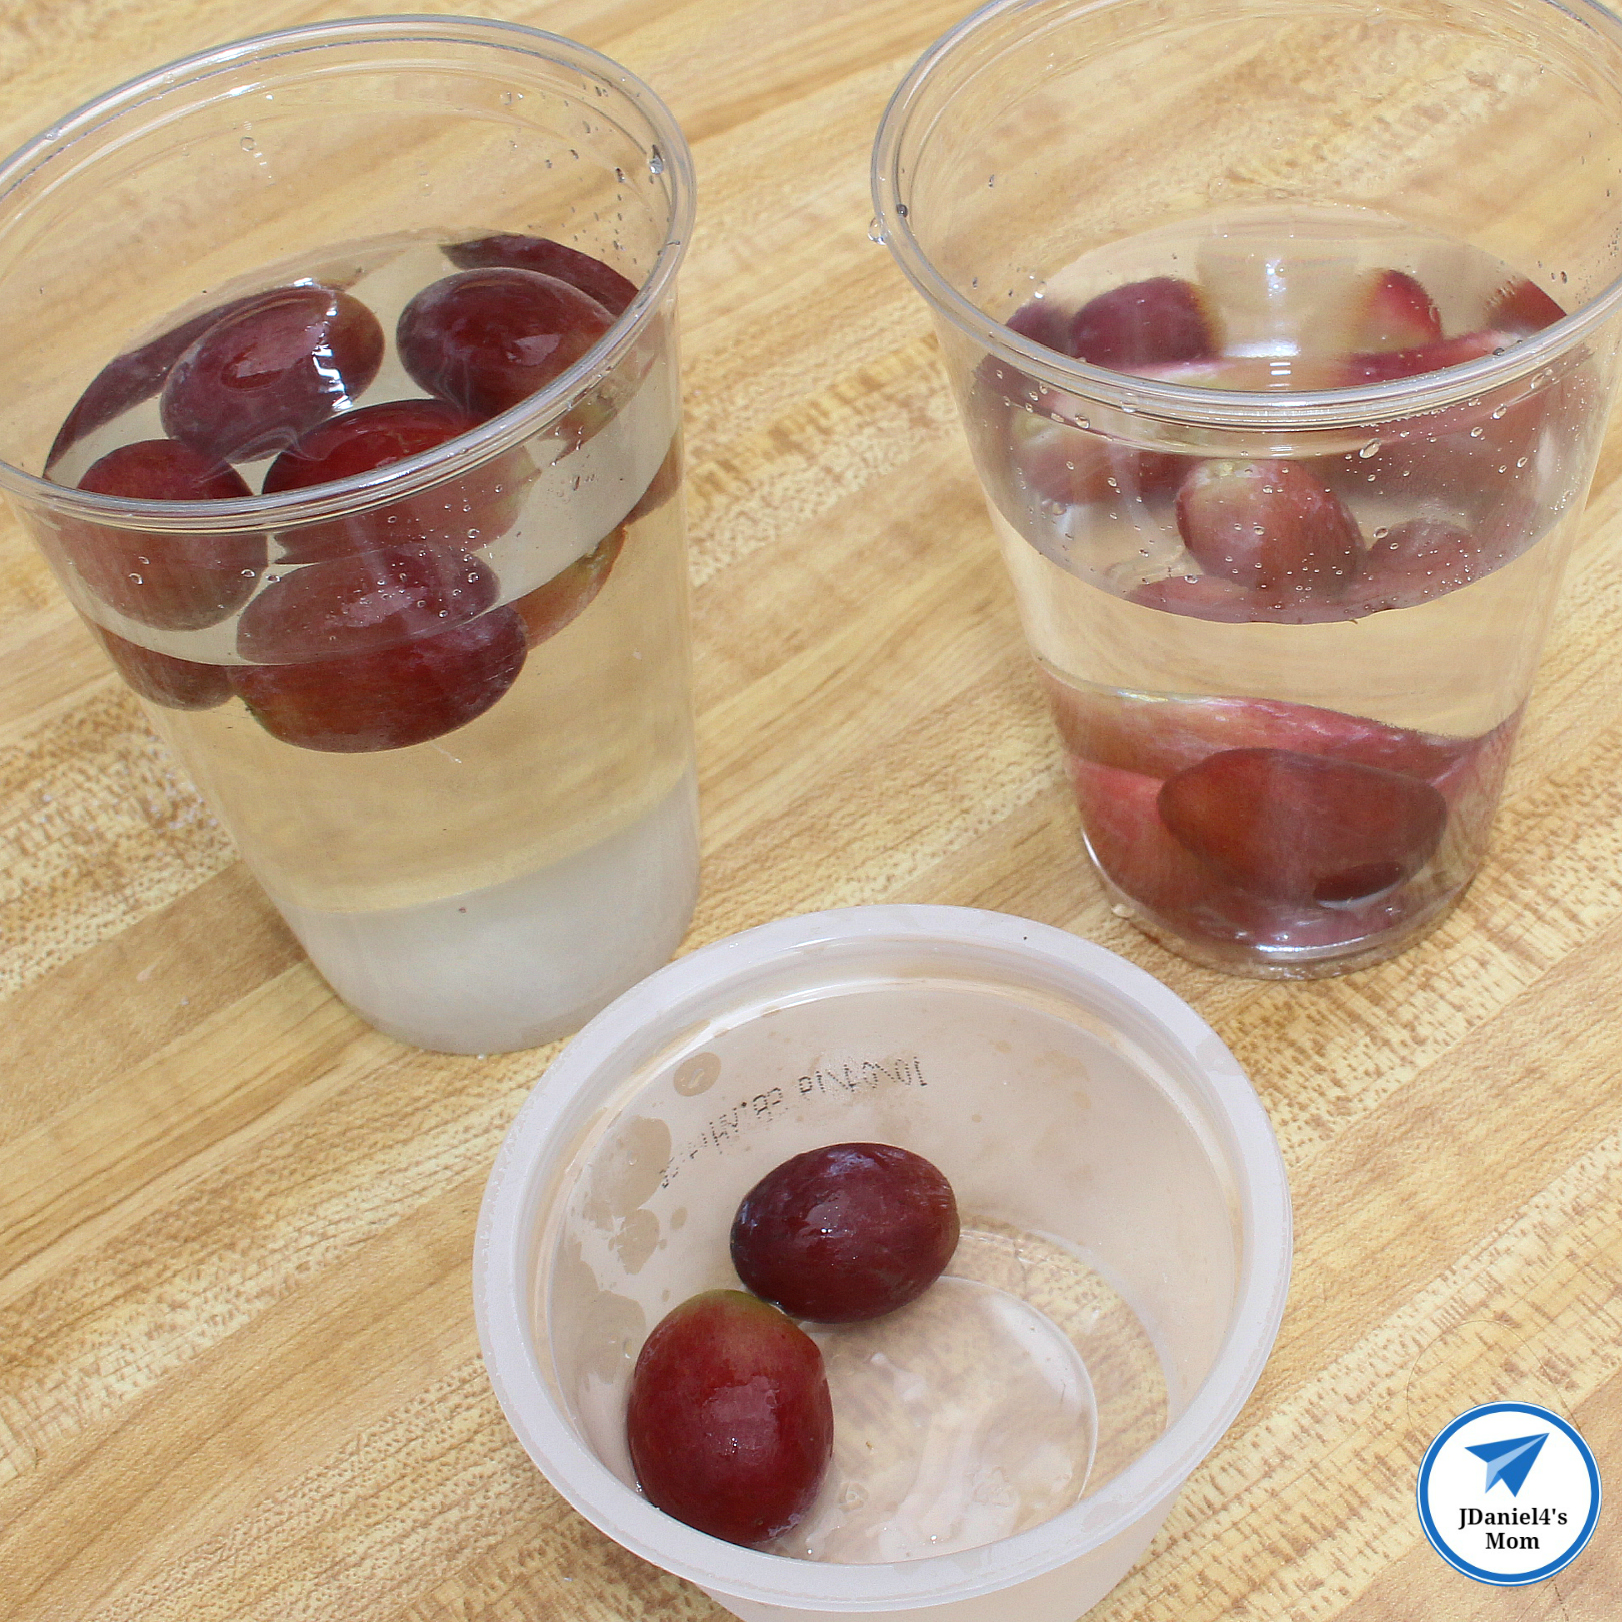 Do Grapes Sink or Float? Sugar Water Density Experiment 